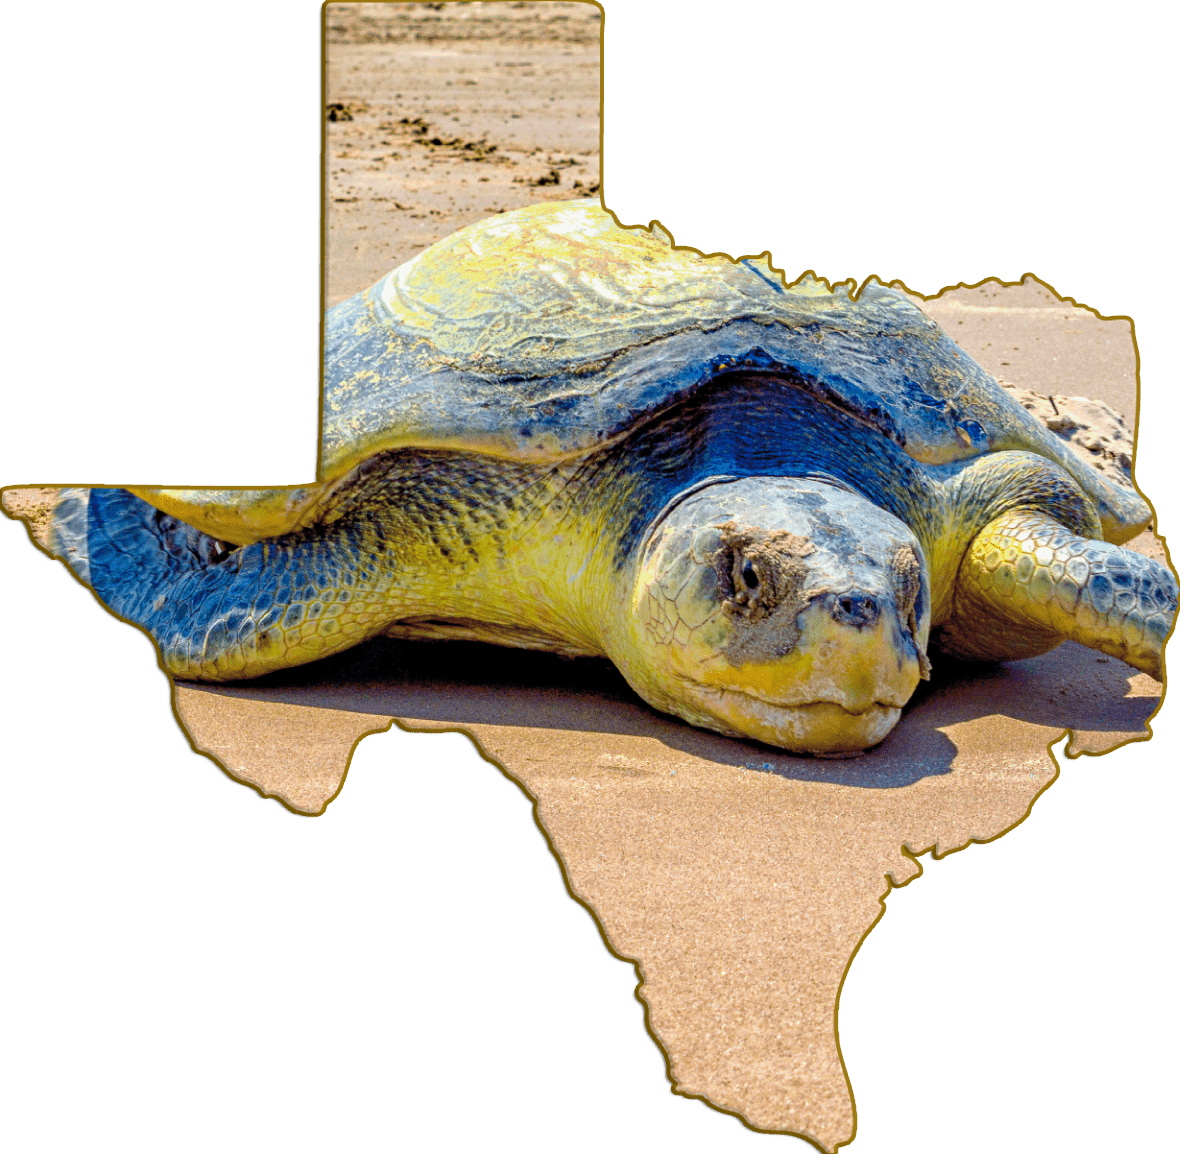 Wimberley Puzzle Company Refrigerator Magnets Kemp's Ridley Endangered Sea Turtle | Texas-Shaped Magnet